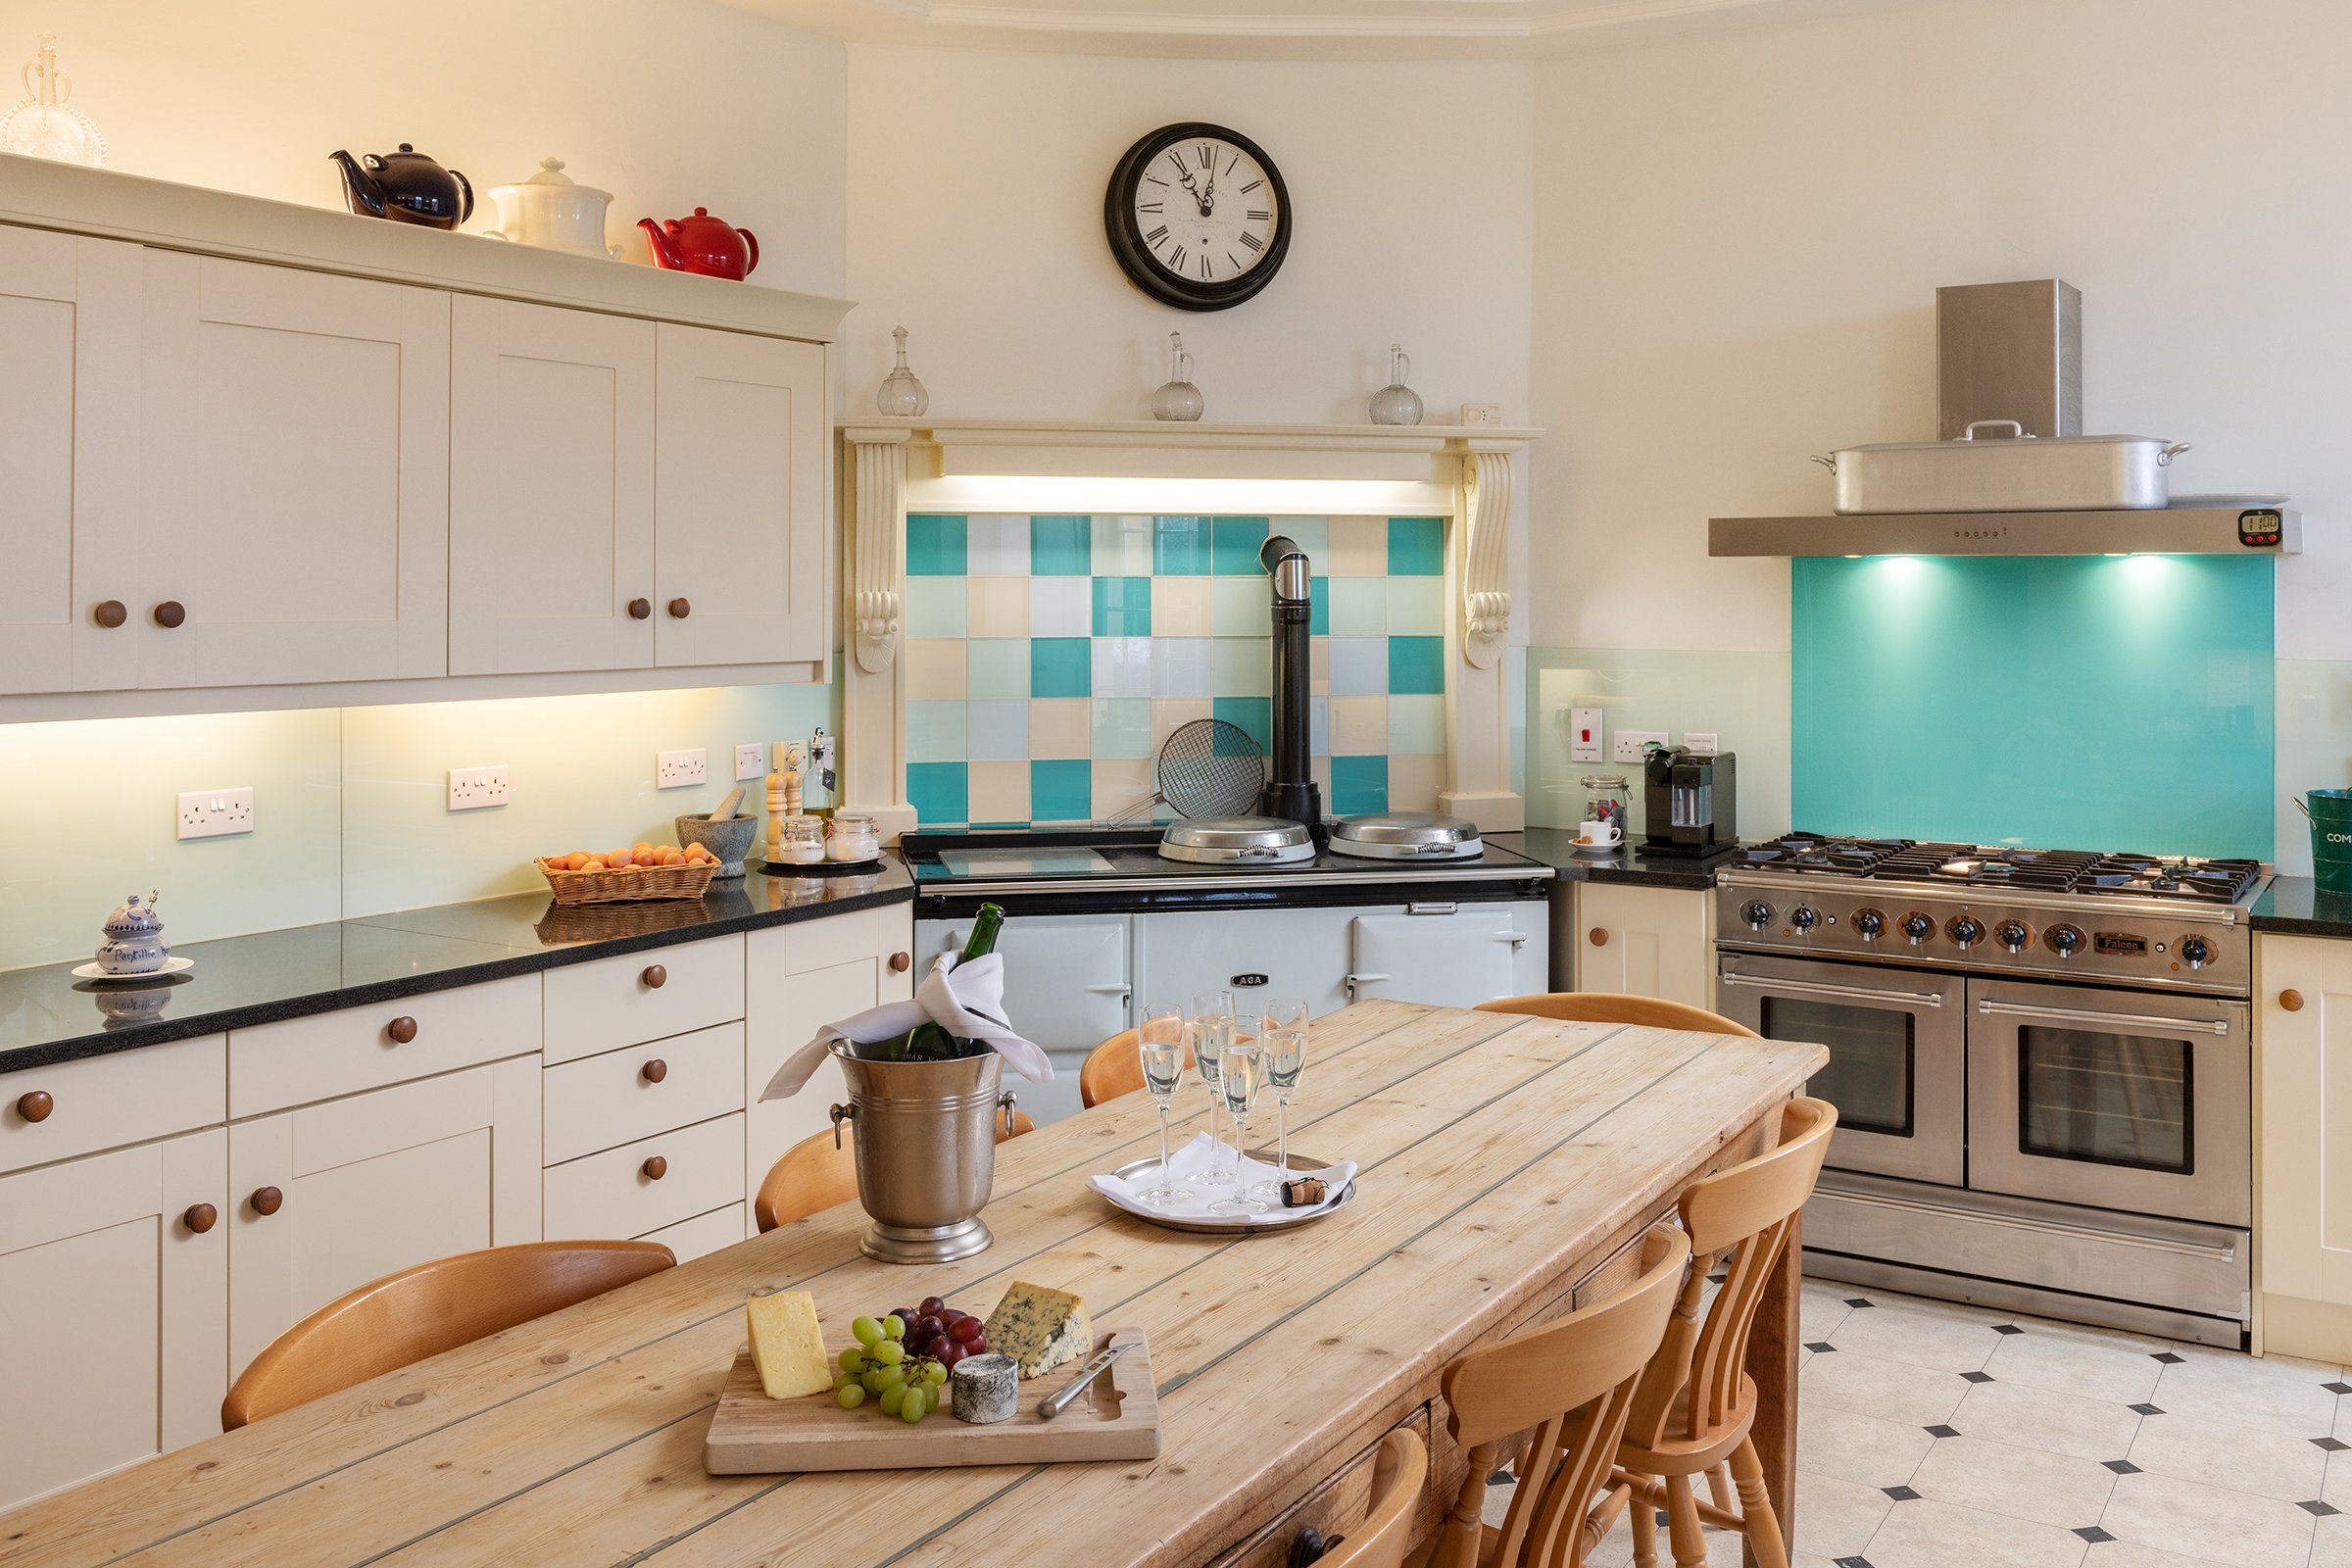 09 Large Farmhouse AGA Kitchen at Pentillie Castle by Richard Downer Photography.jpg